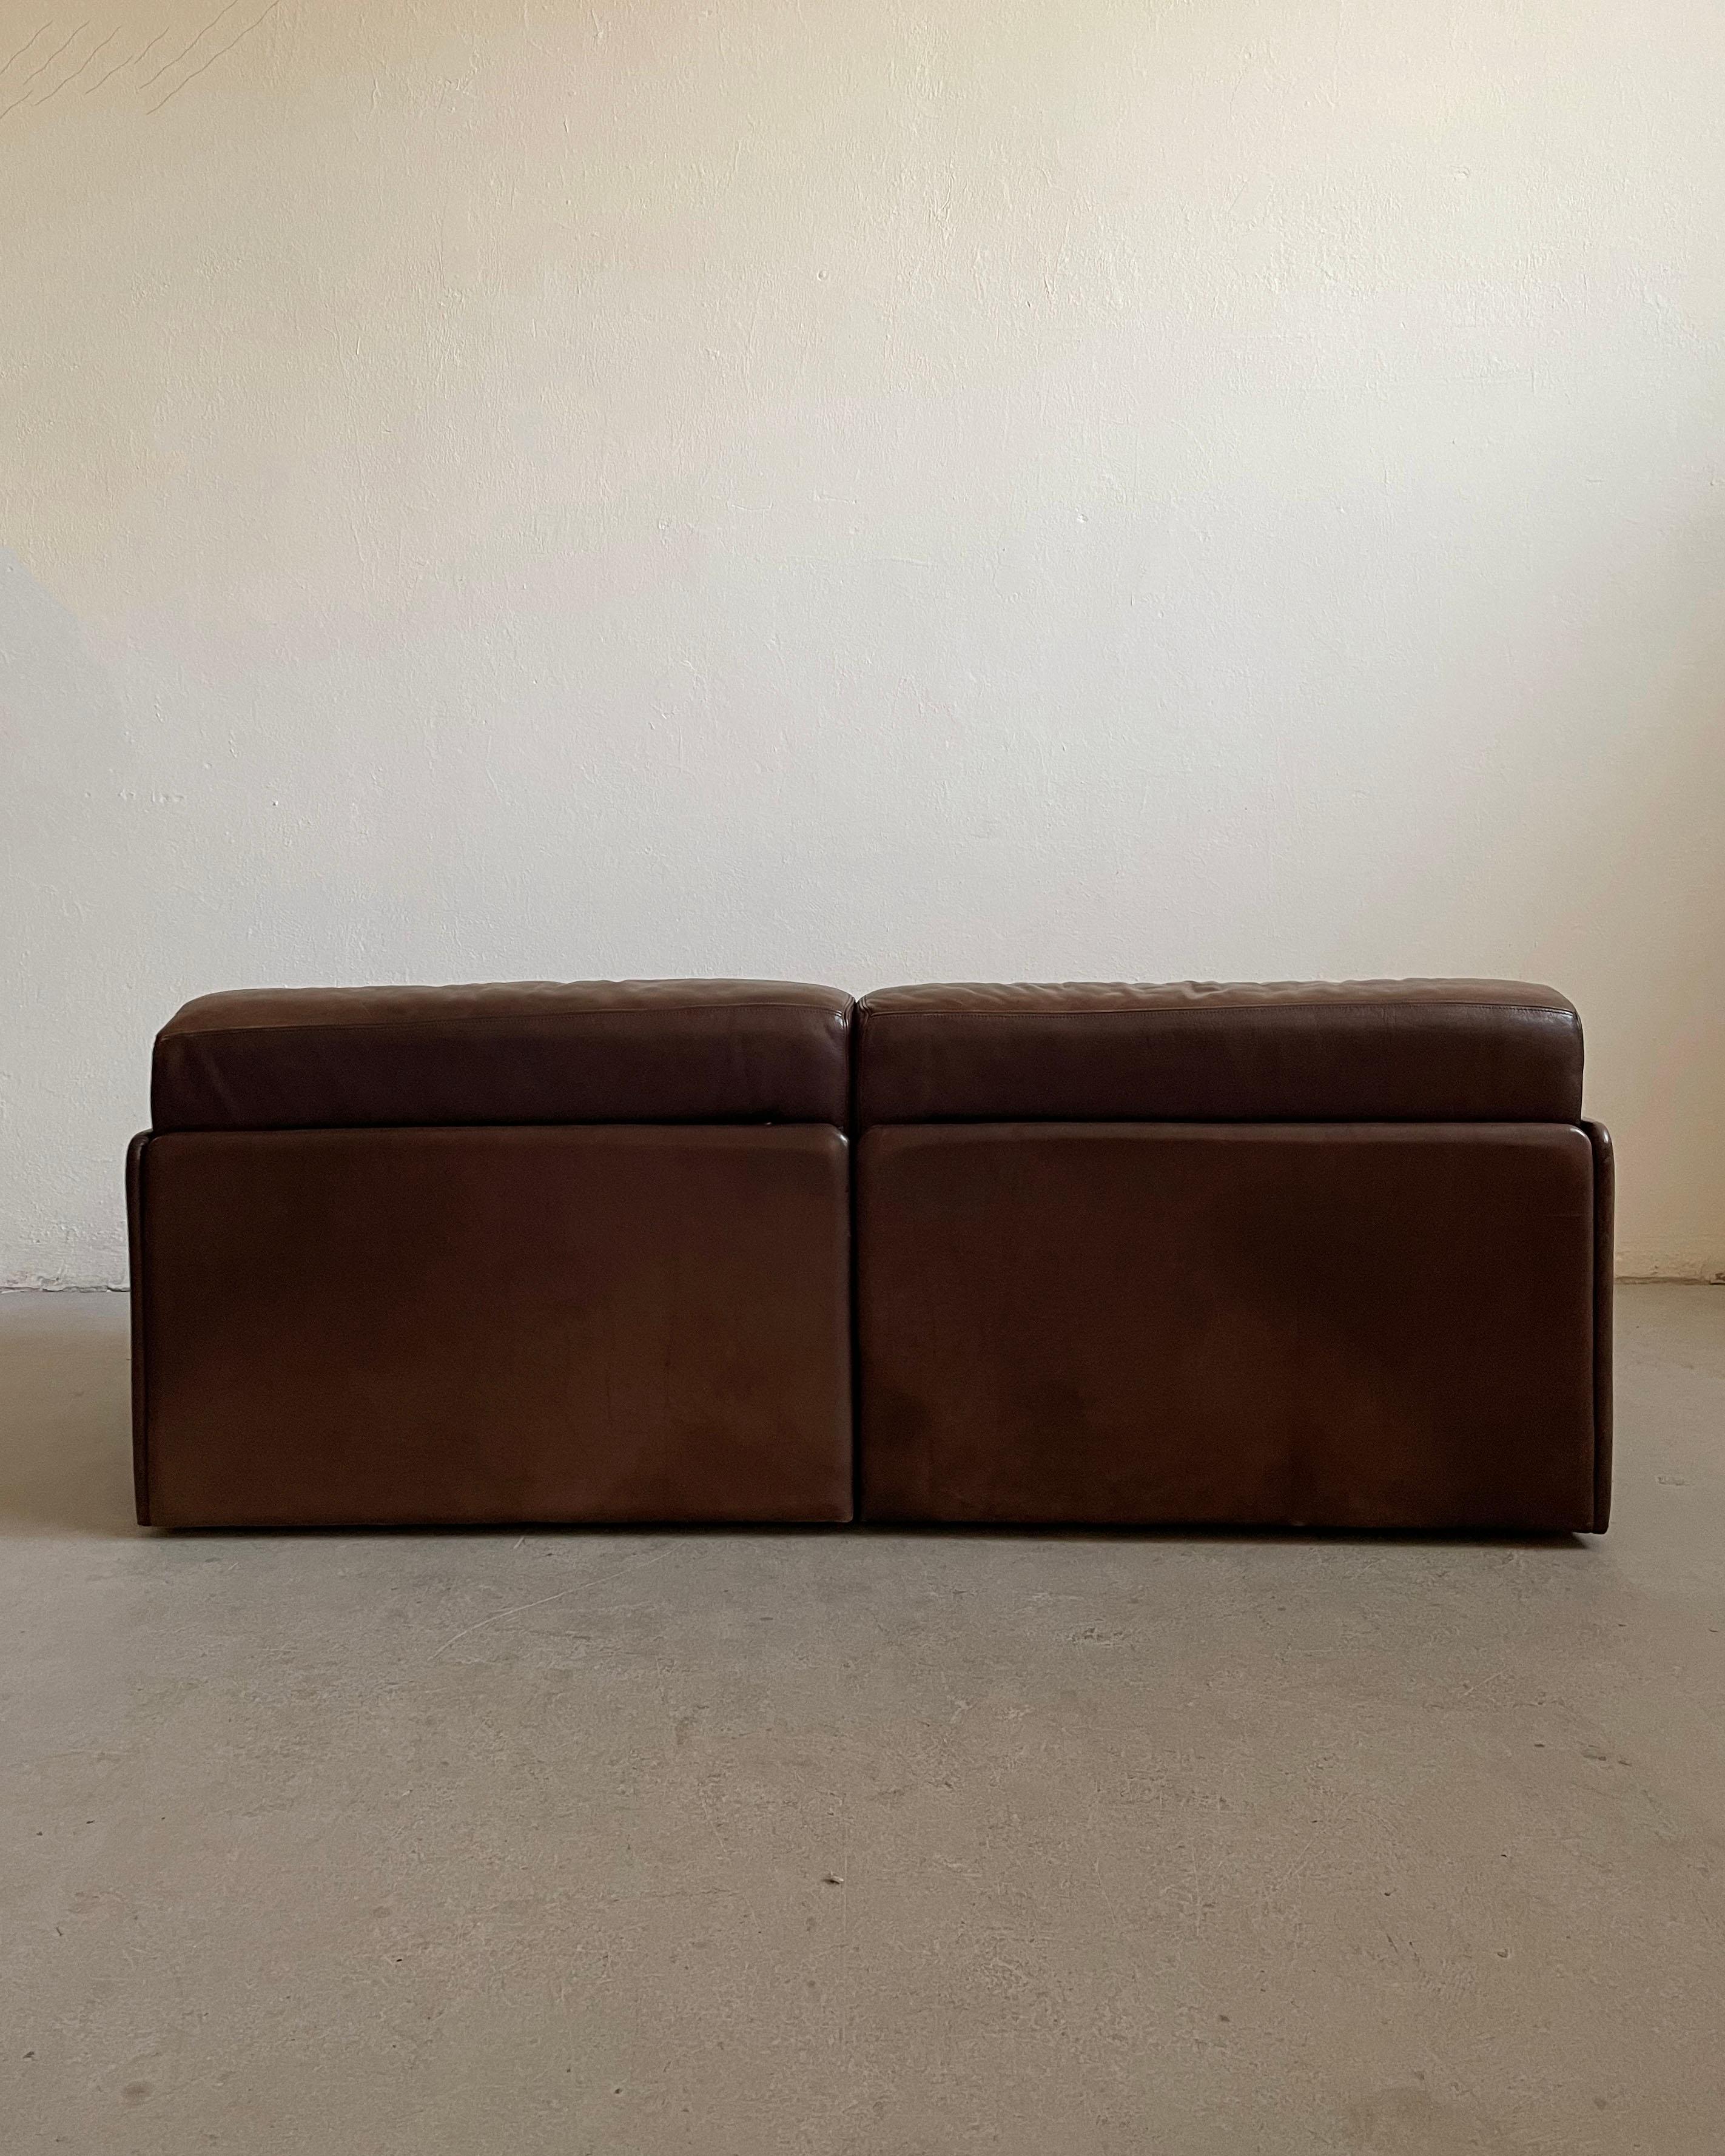 Swiss Mid-Century De Sede Ds 76 Modular Sofa Bed, 2-piece Brown Leather Modules, 1970s For Sale